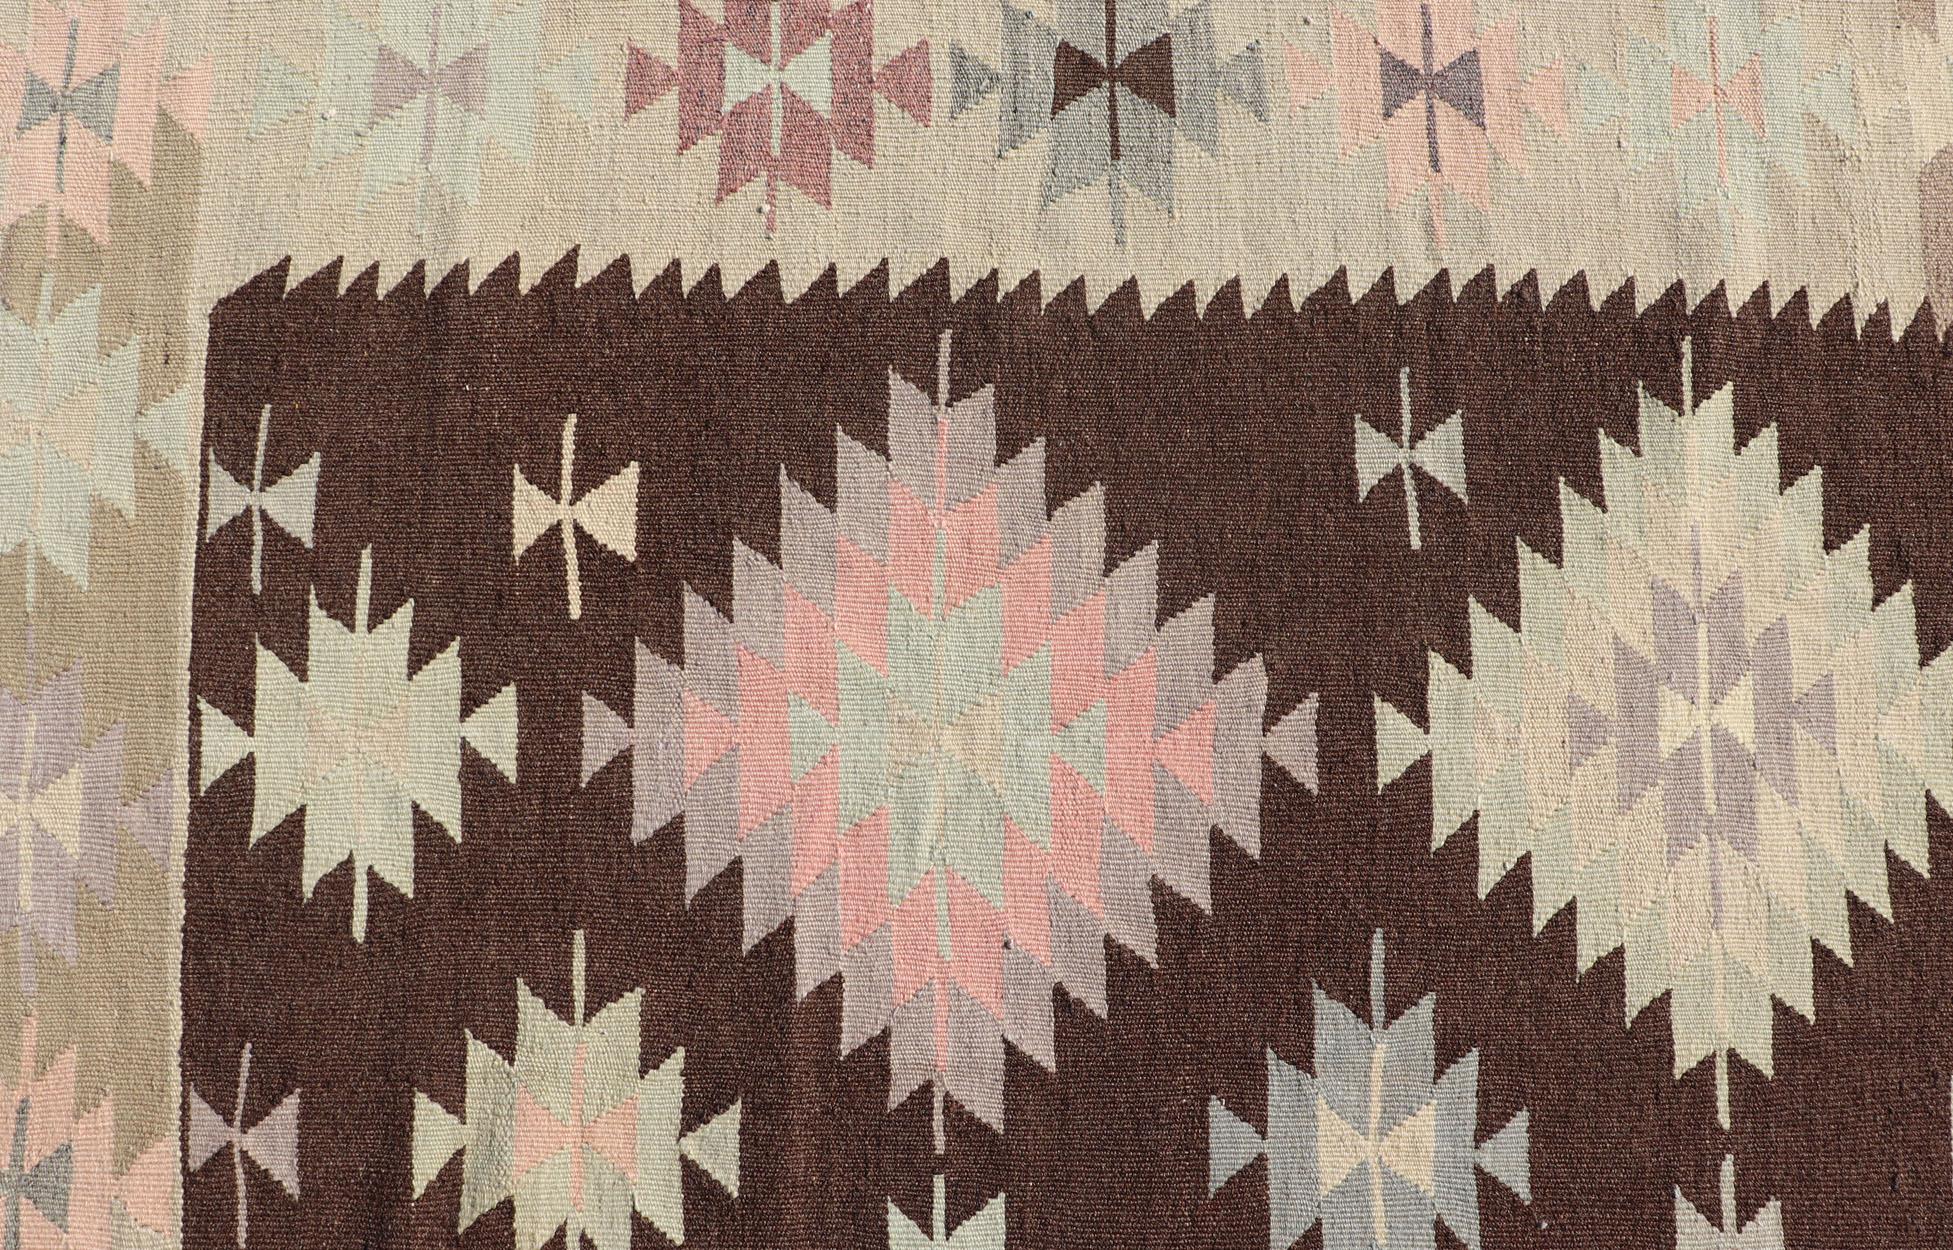 Tribal and Geometrics Turkish Kilim in Brown with Cream, Pink, Light Gray/Blue For Sale 7